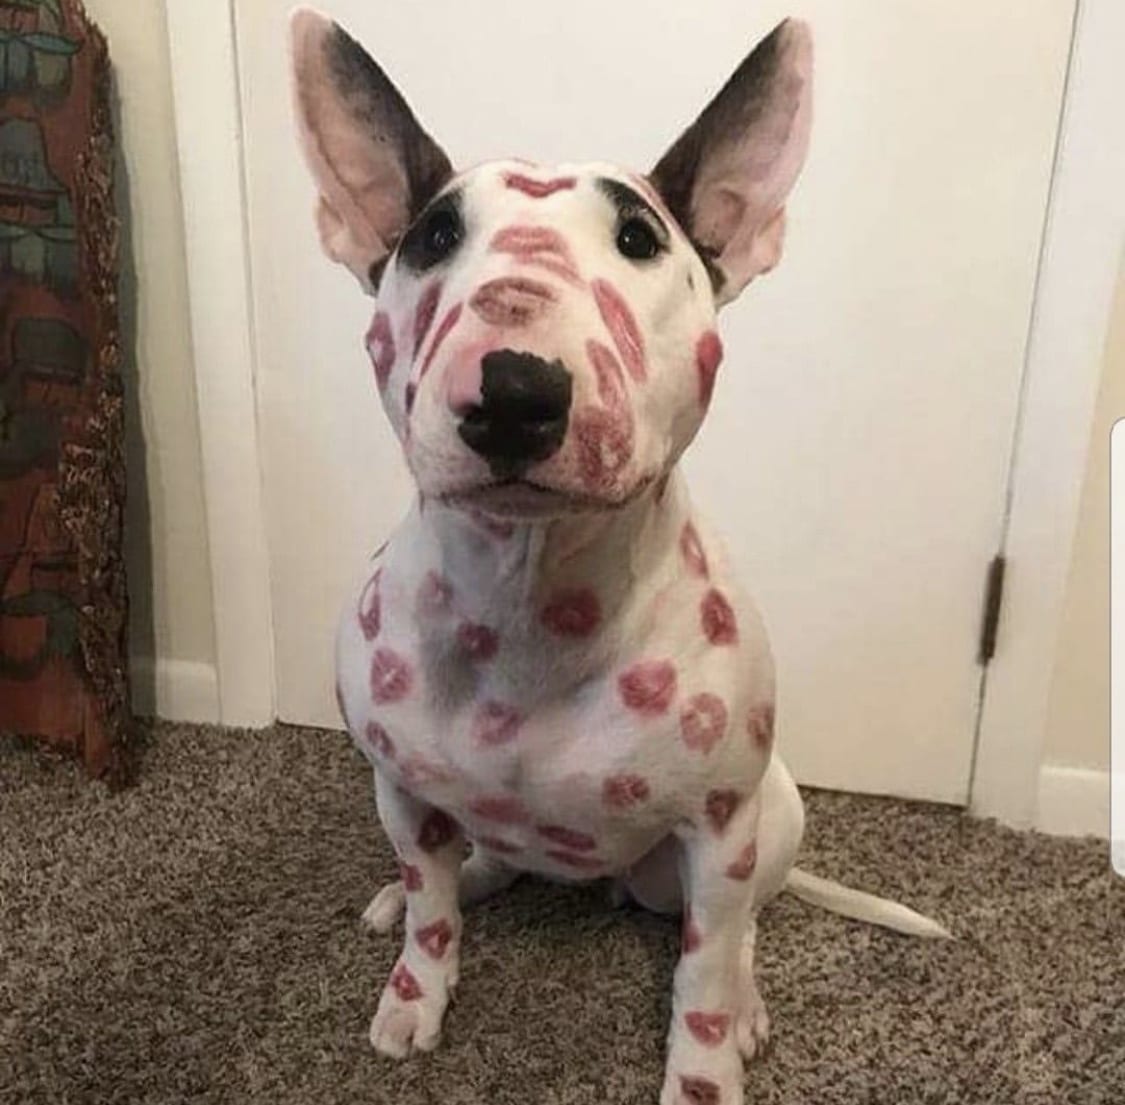 Bull Terrier sitting on the floor with kiss marks all over its face and body